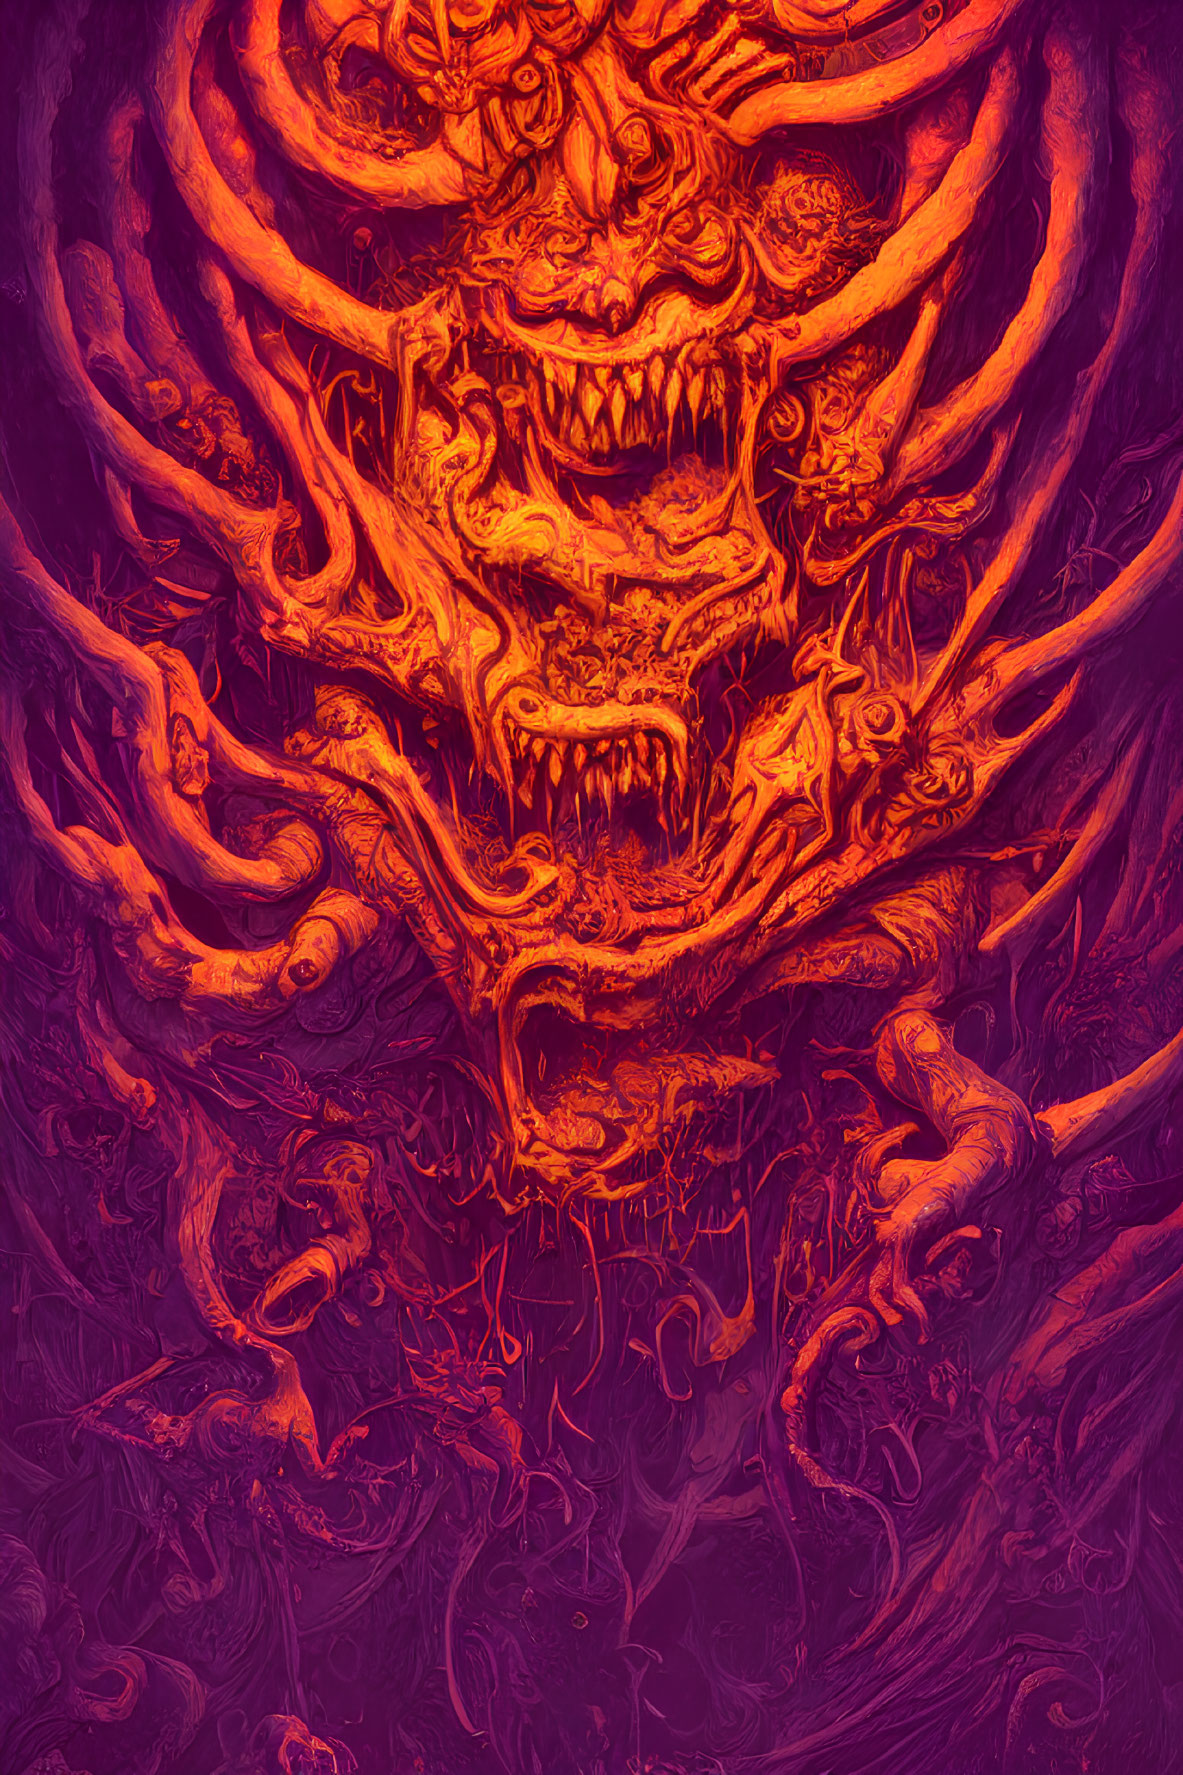 Vivid Red and Purple Illustration of Demonic Figures and Fiery Textures